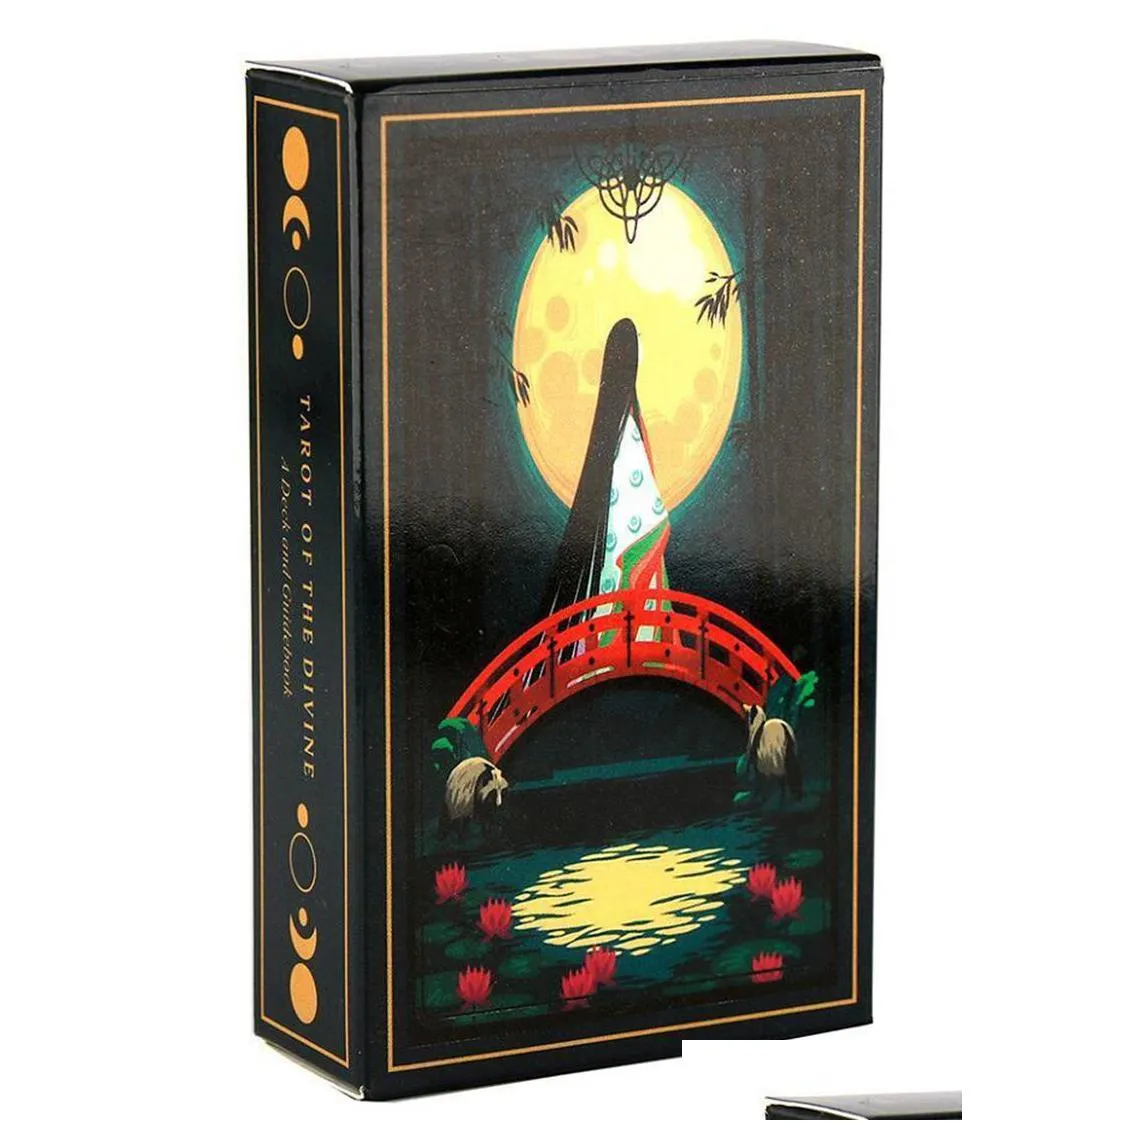 tarot card games linestrider dreams toy divination star spinner muse hoodoo occult ridetarot del fuego cards tarots deck oracles e-guidebook game dhl